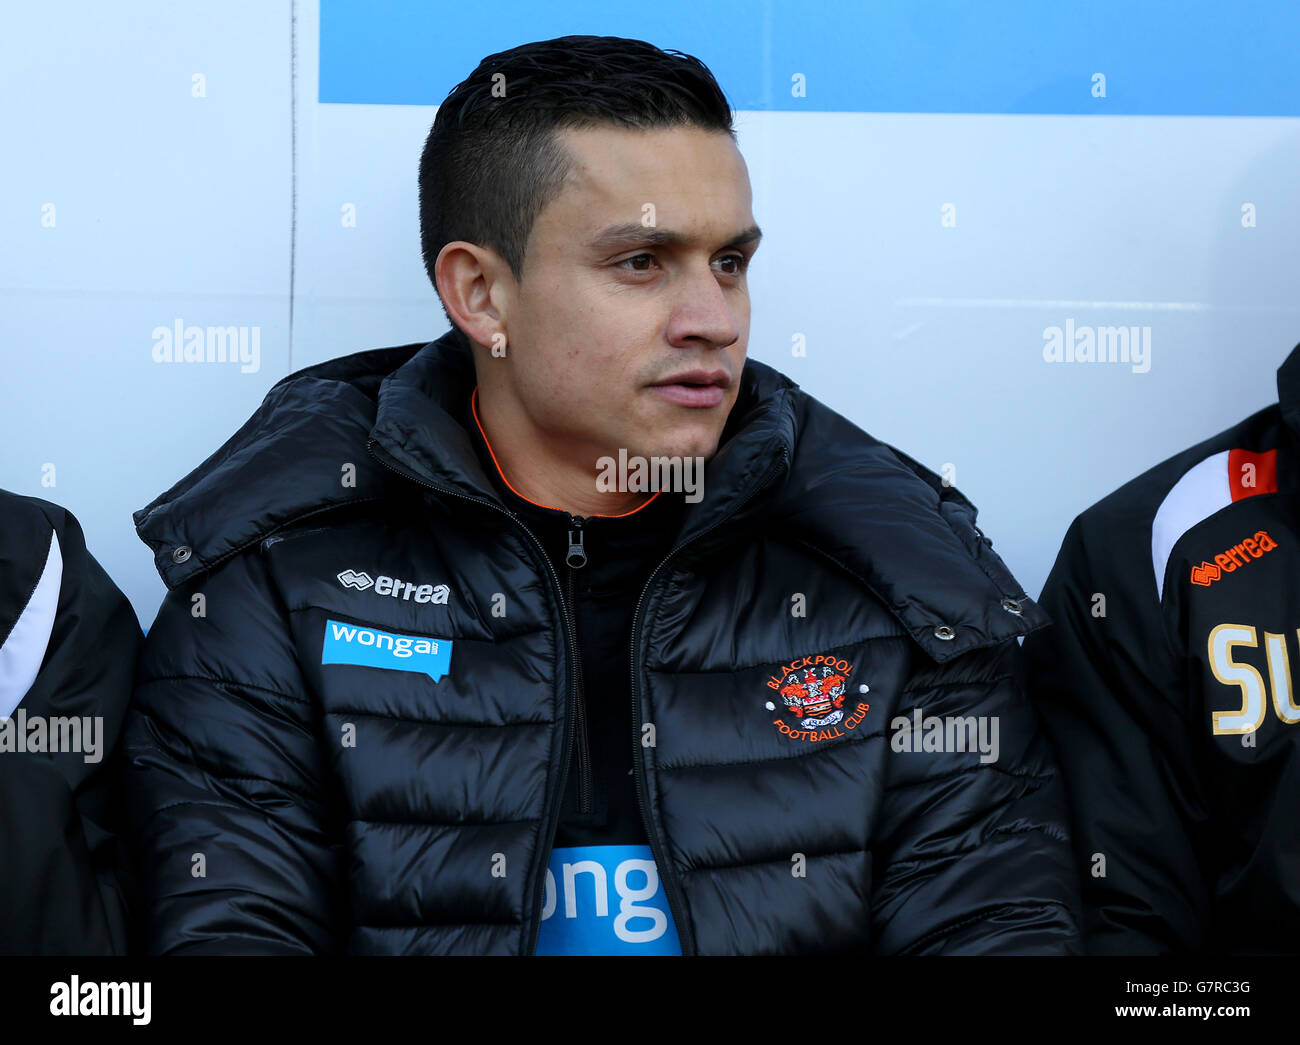 Soccer - Sky Bet Championship - Blackpool v Sheffield Wednesday - Bloomfield Road. Blackpool's Jose Miguel Cubero on the bench Stock Photo